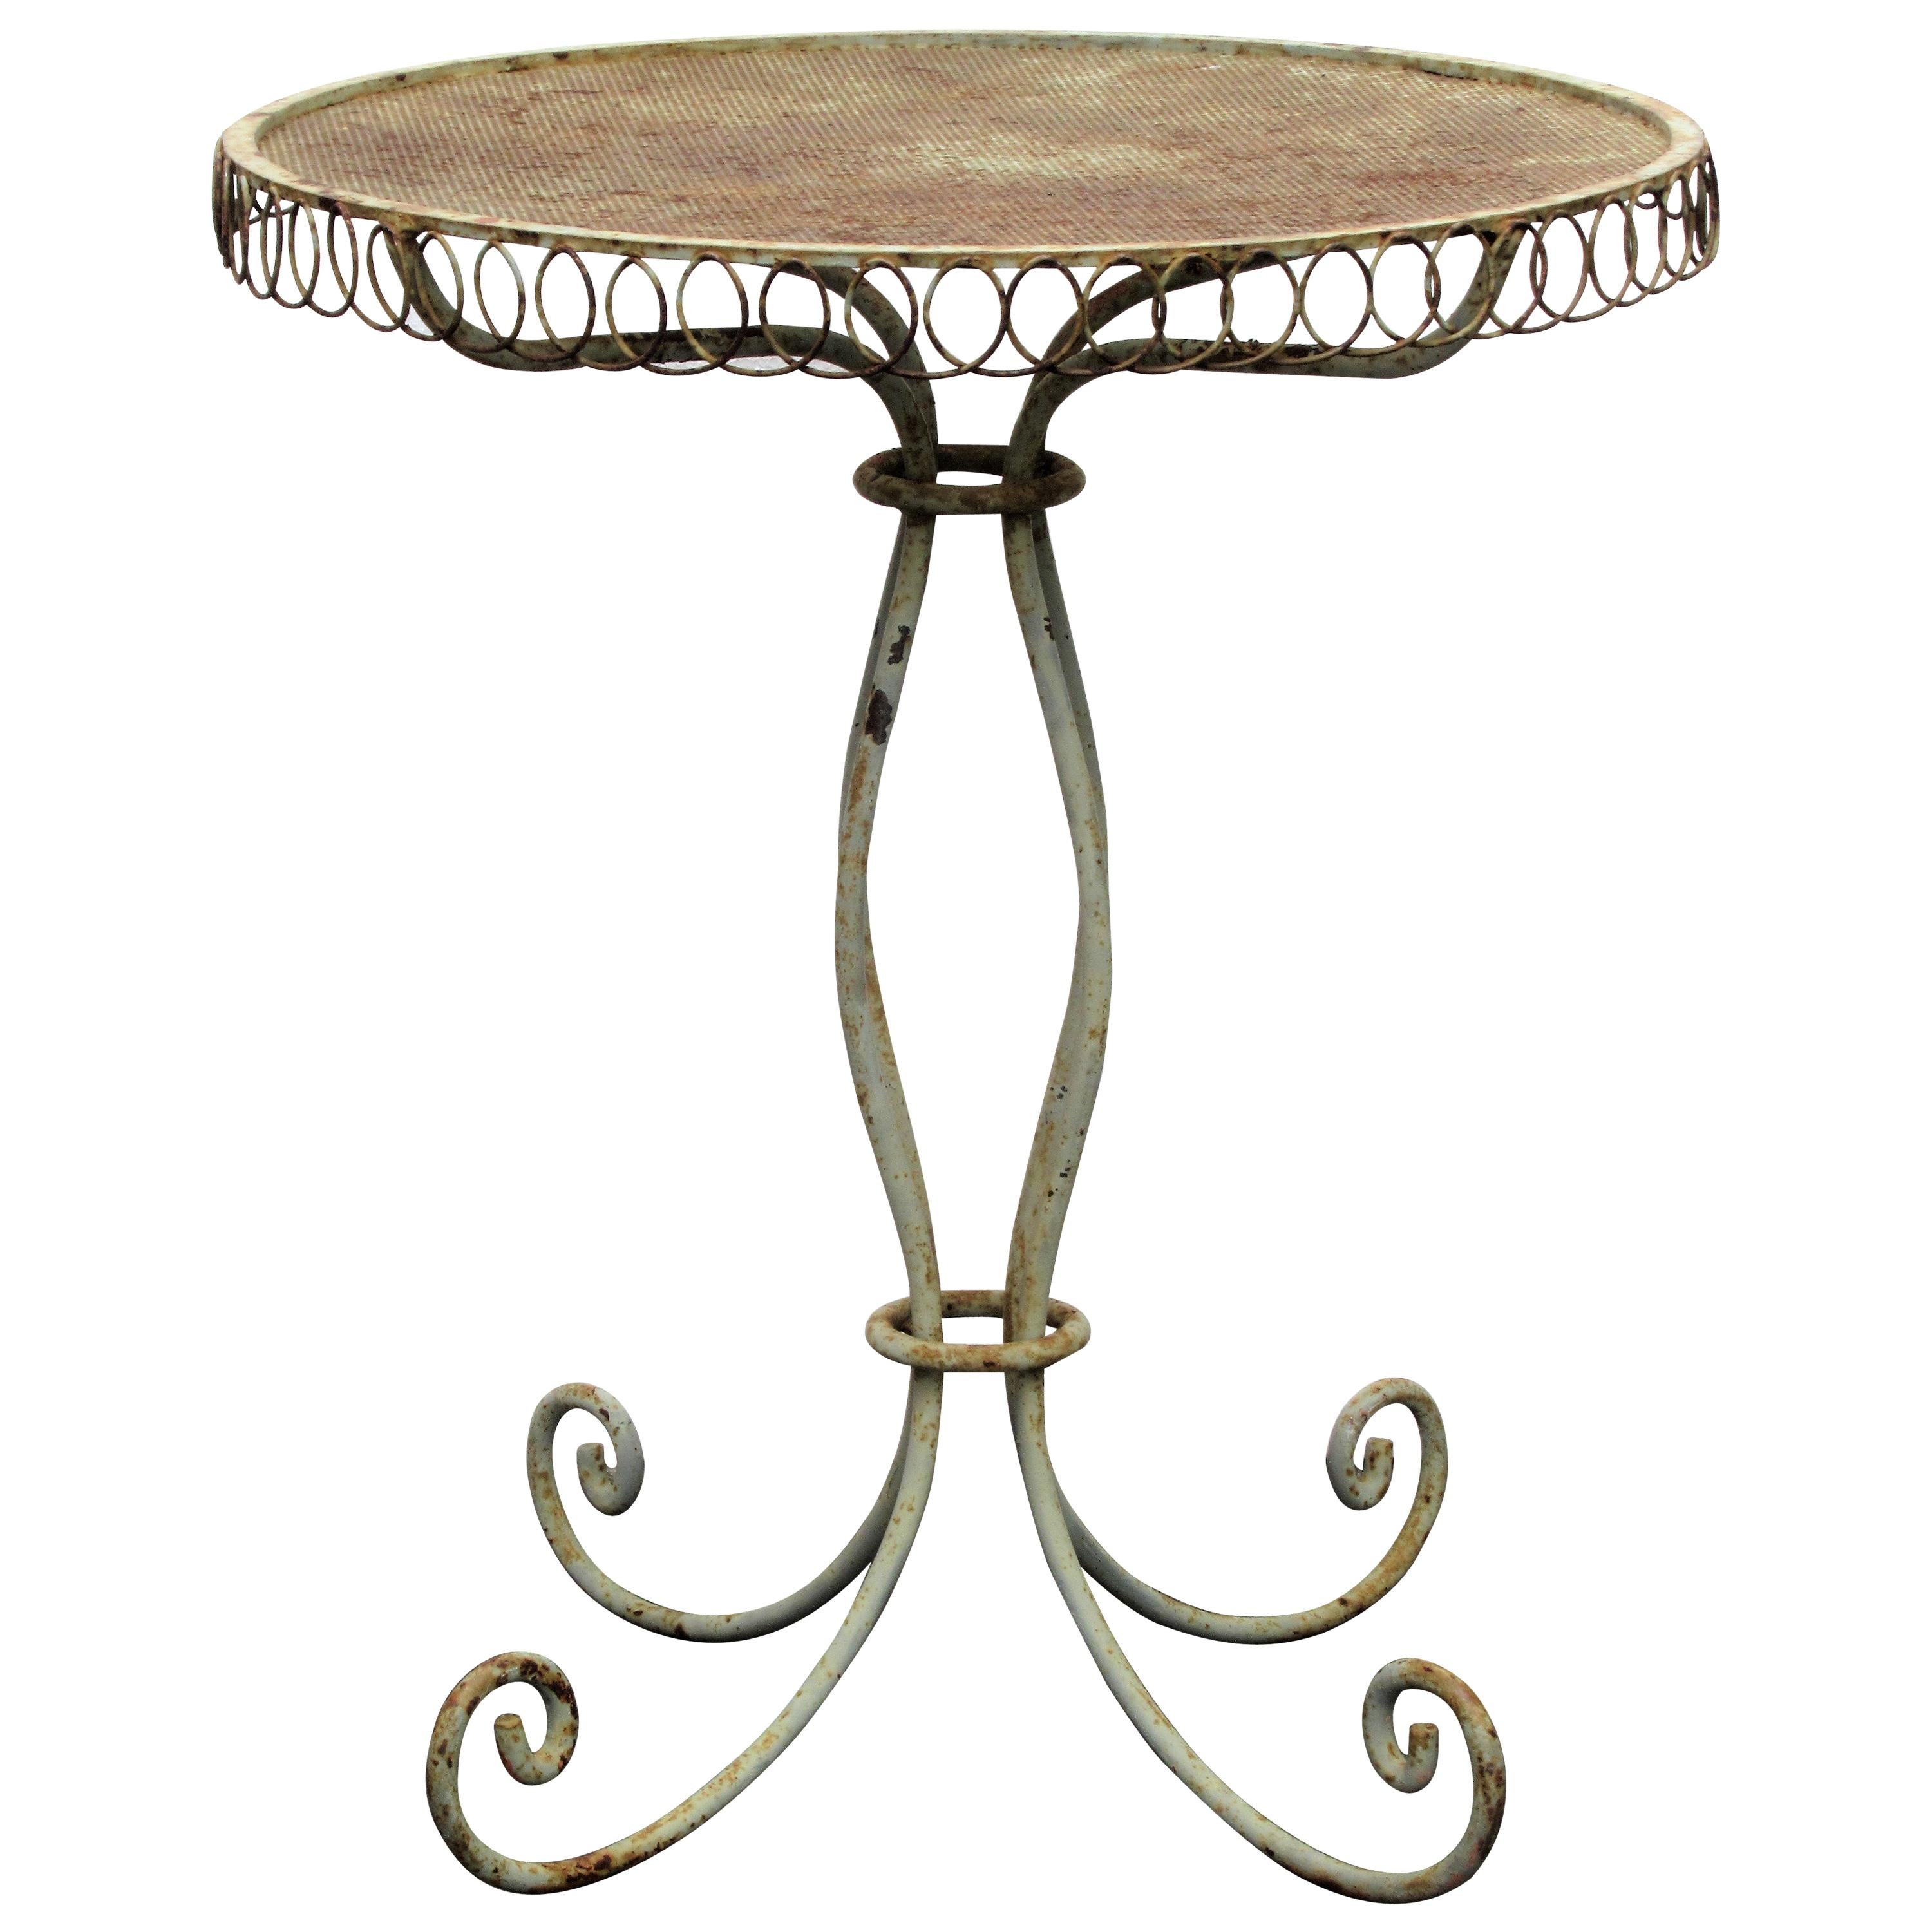 Antique French Iron Wire Garden Table